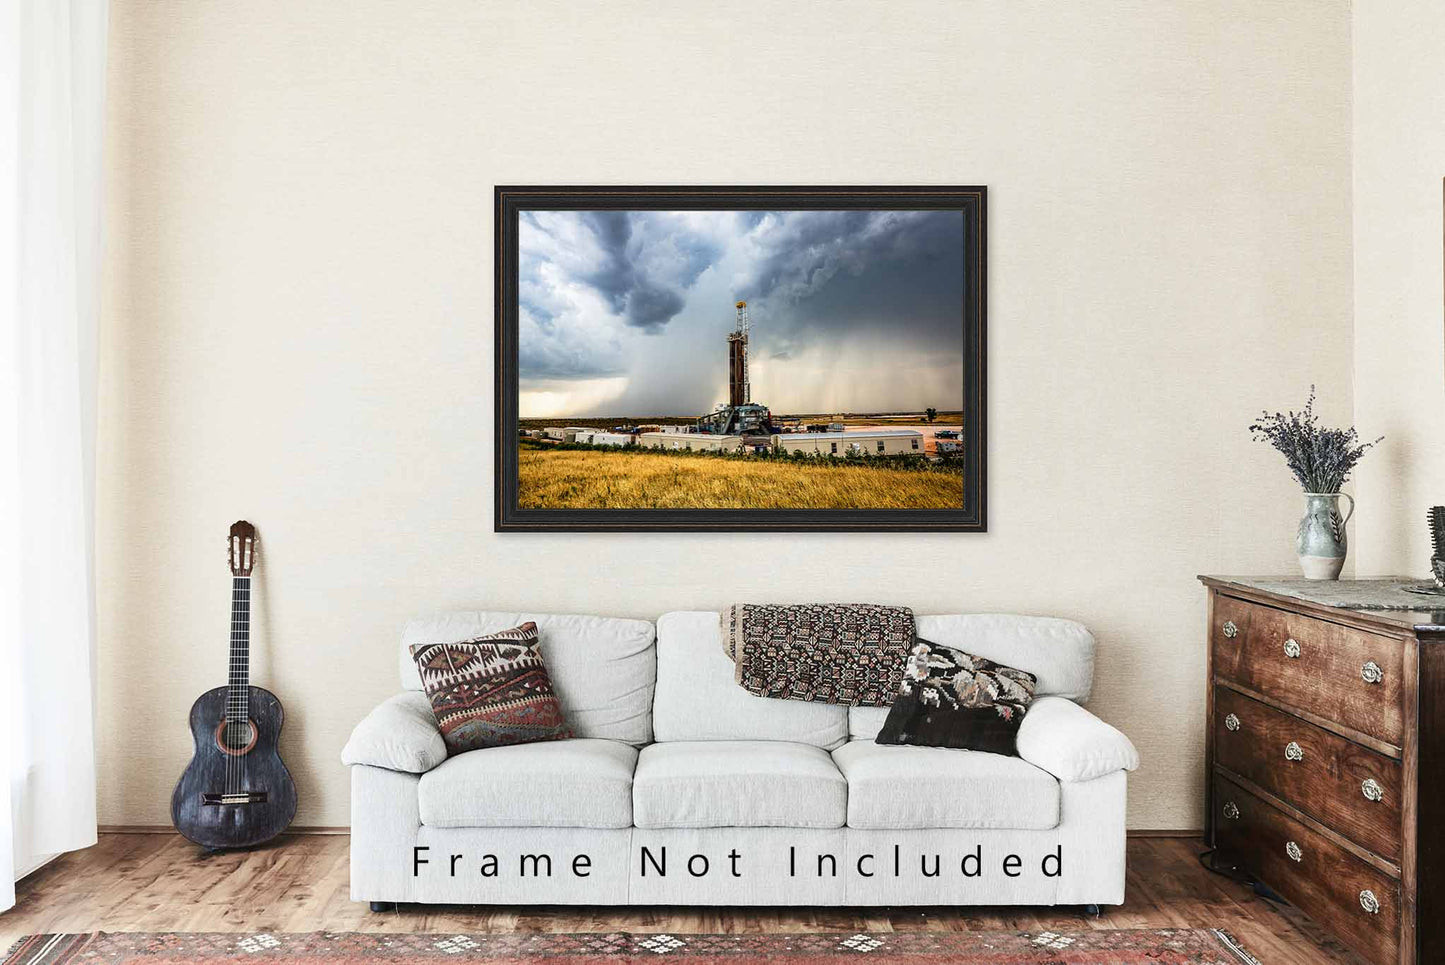 Oilfield Photography Print (Not Framed) Picture of Drilling Rig and Storm On Summer Day in Oklahoma Thunderstorm Wall Art Oil and Gas Decor